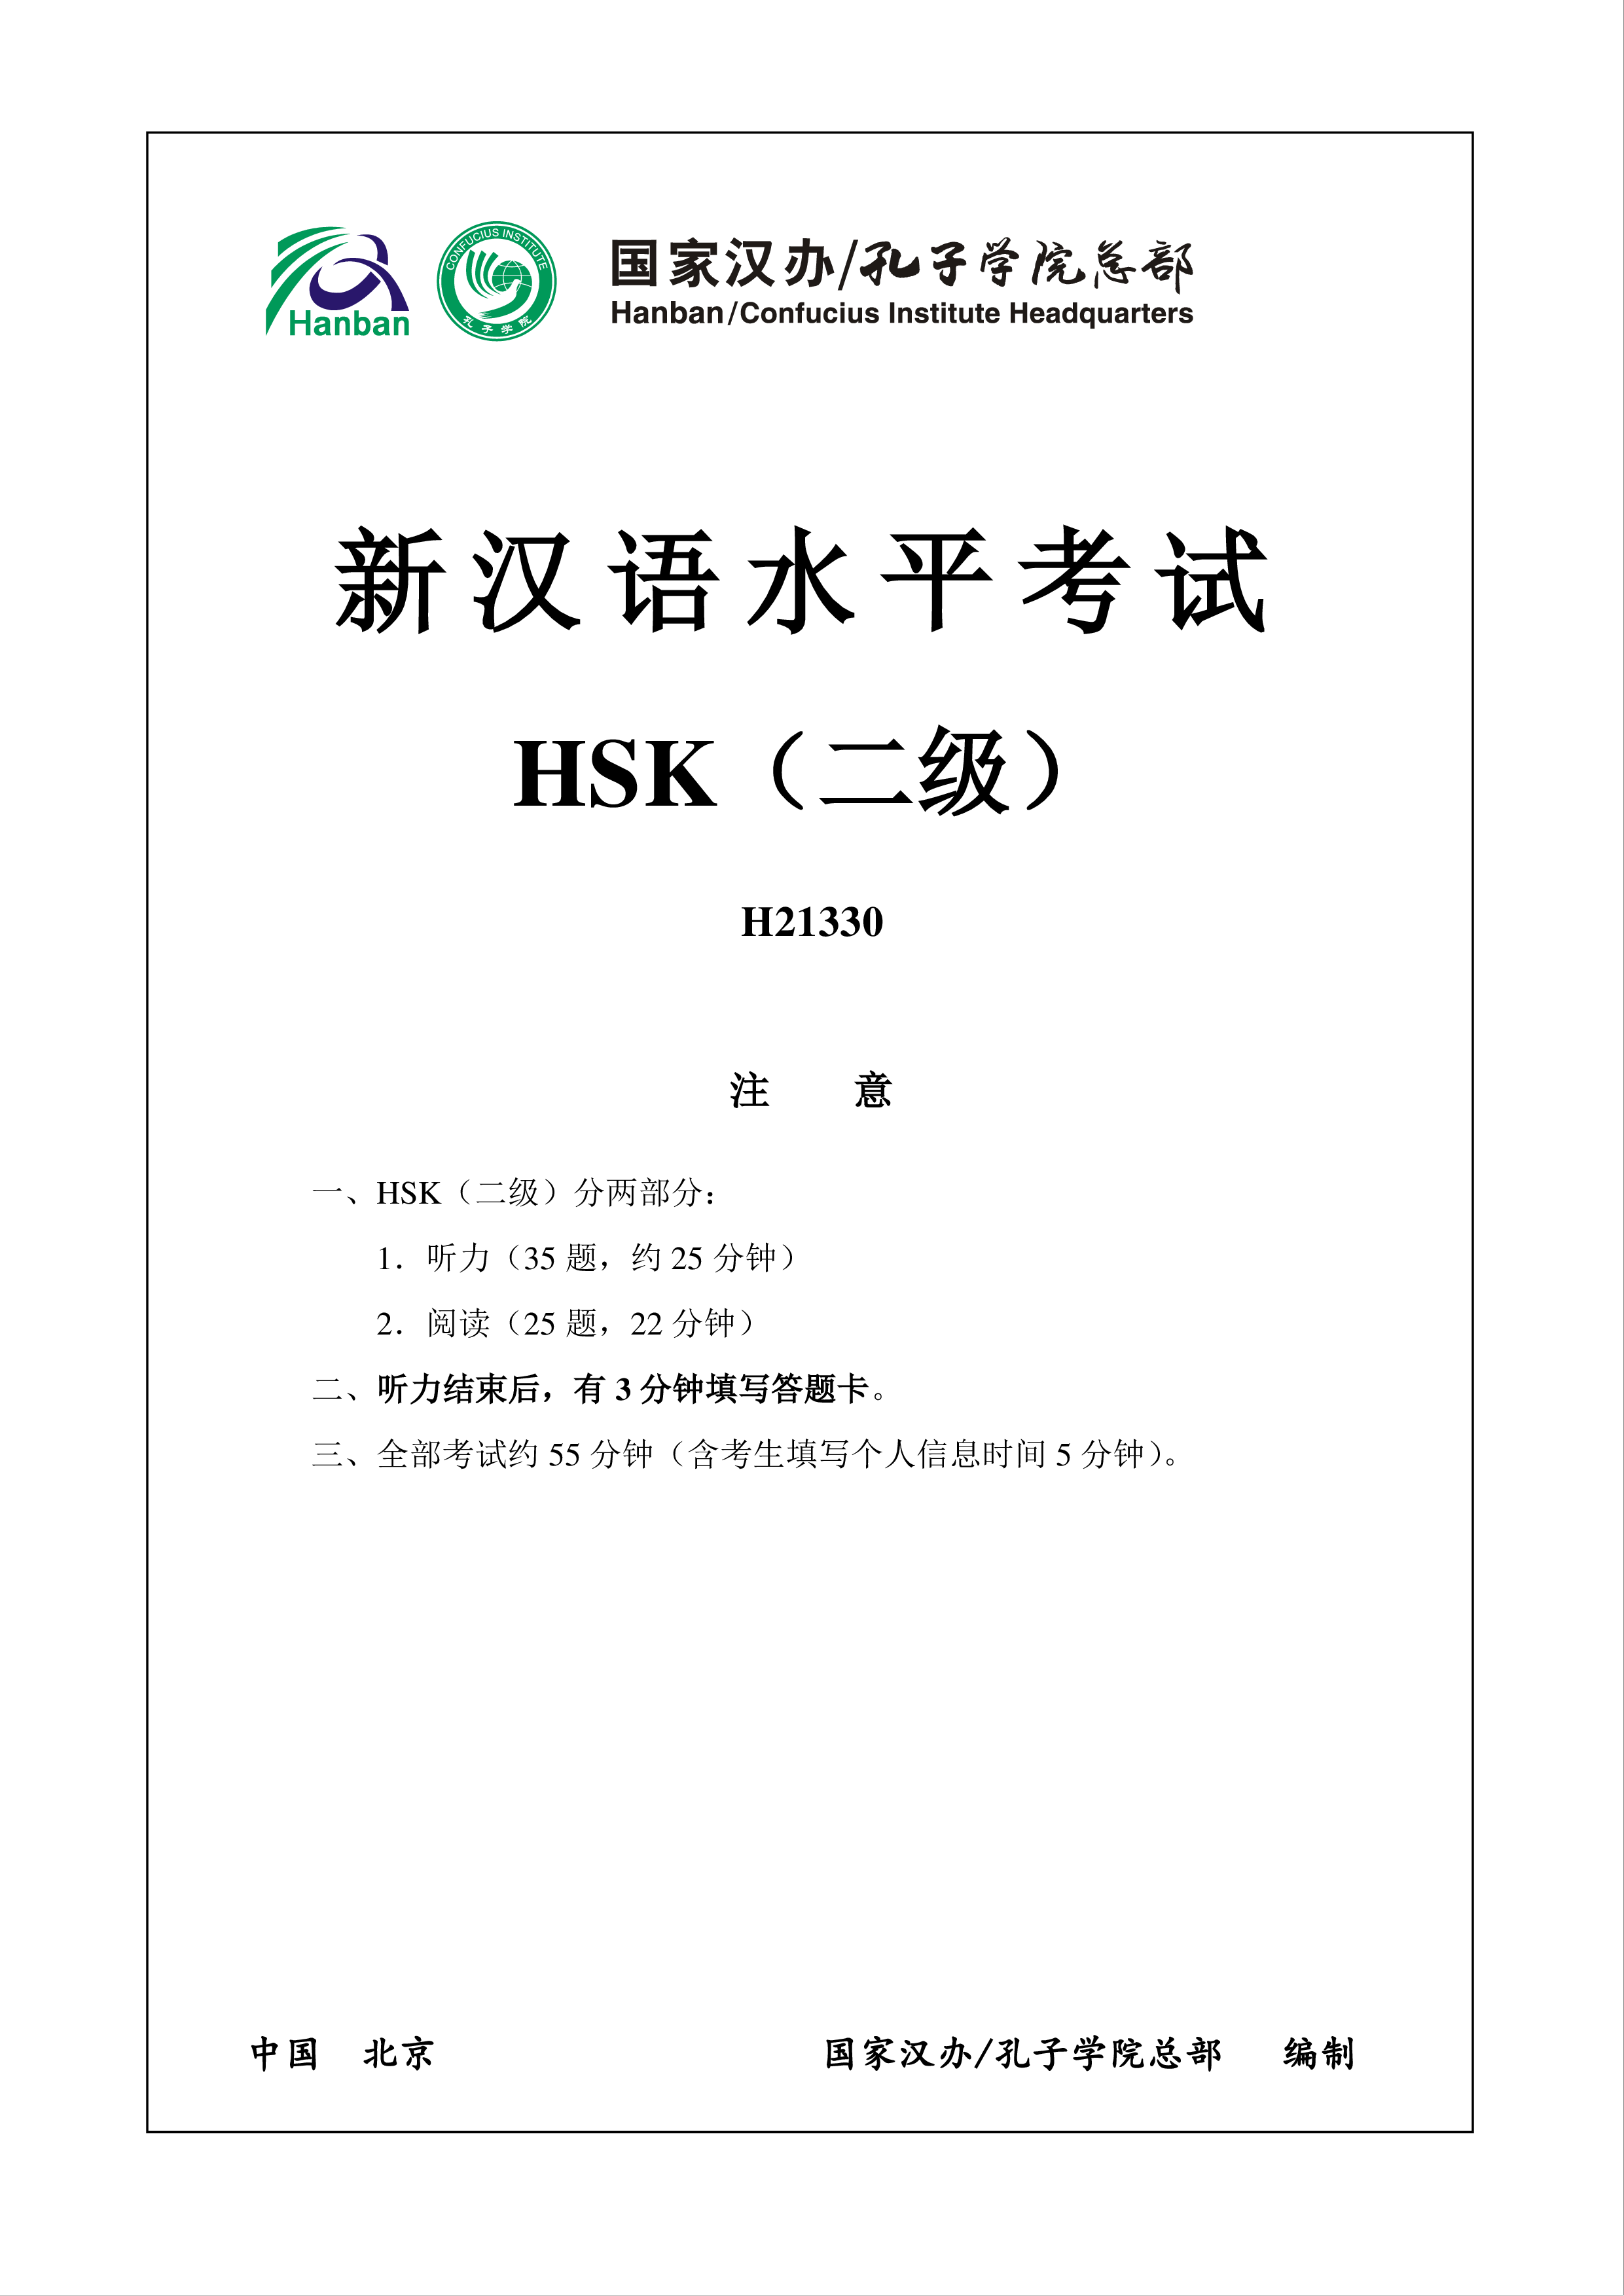 hsk2 h21330 chinese exam including answers, audio template